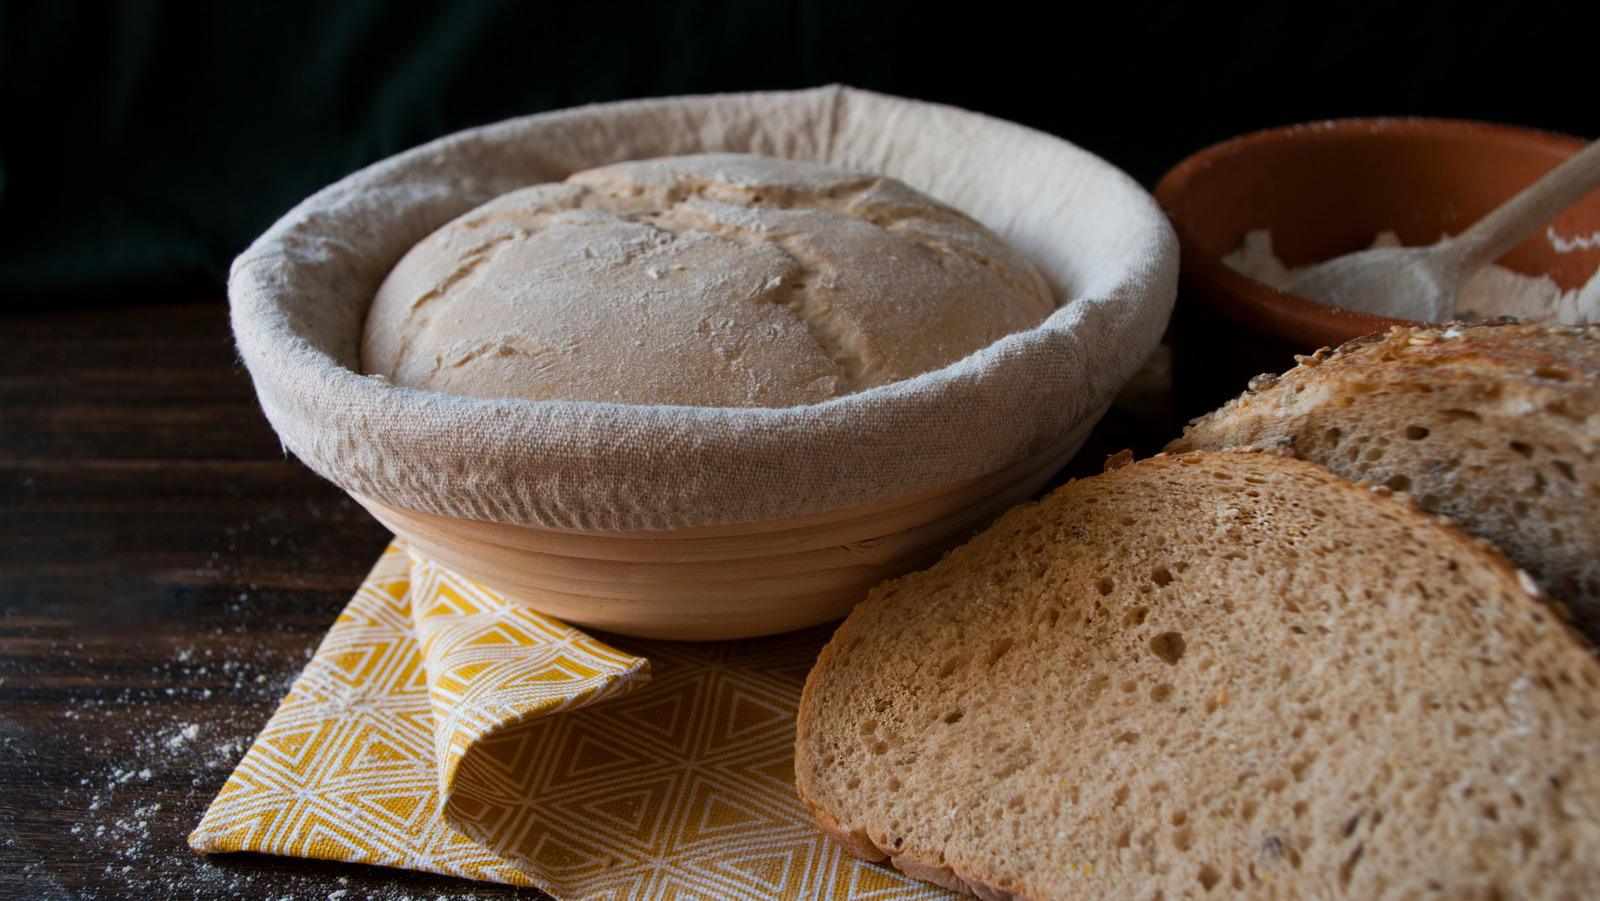 How to tell if bread dough is over proved - How to proof bread dough